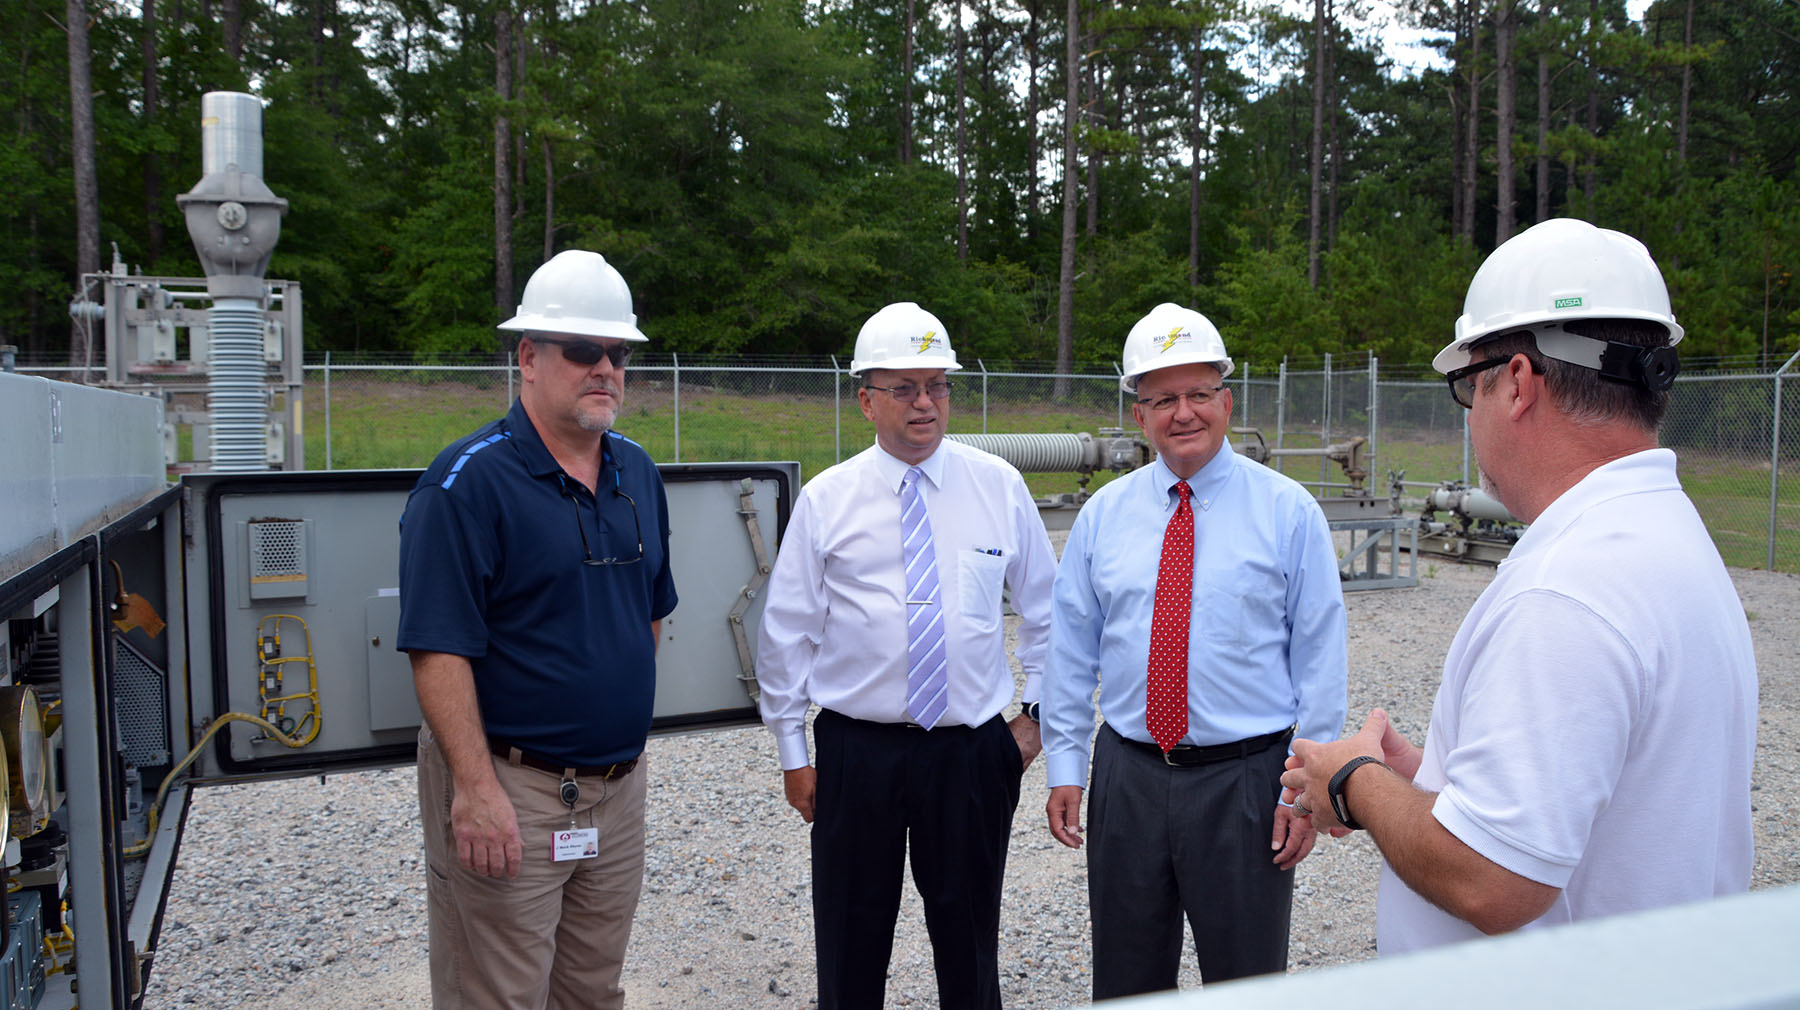 College president Dr. Dale McInnis and Duke Energy's David McNeill talk with faculty about equipment in the substation.